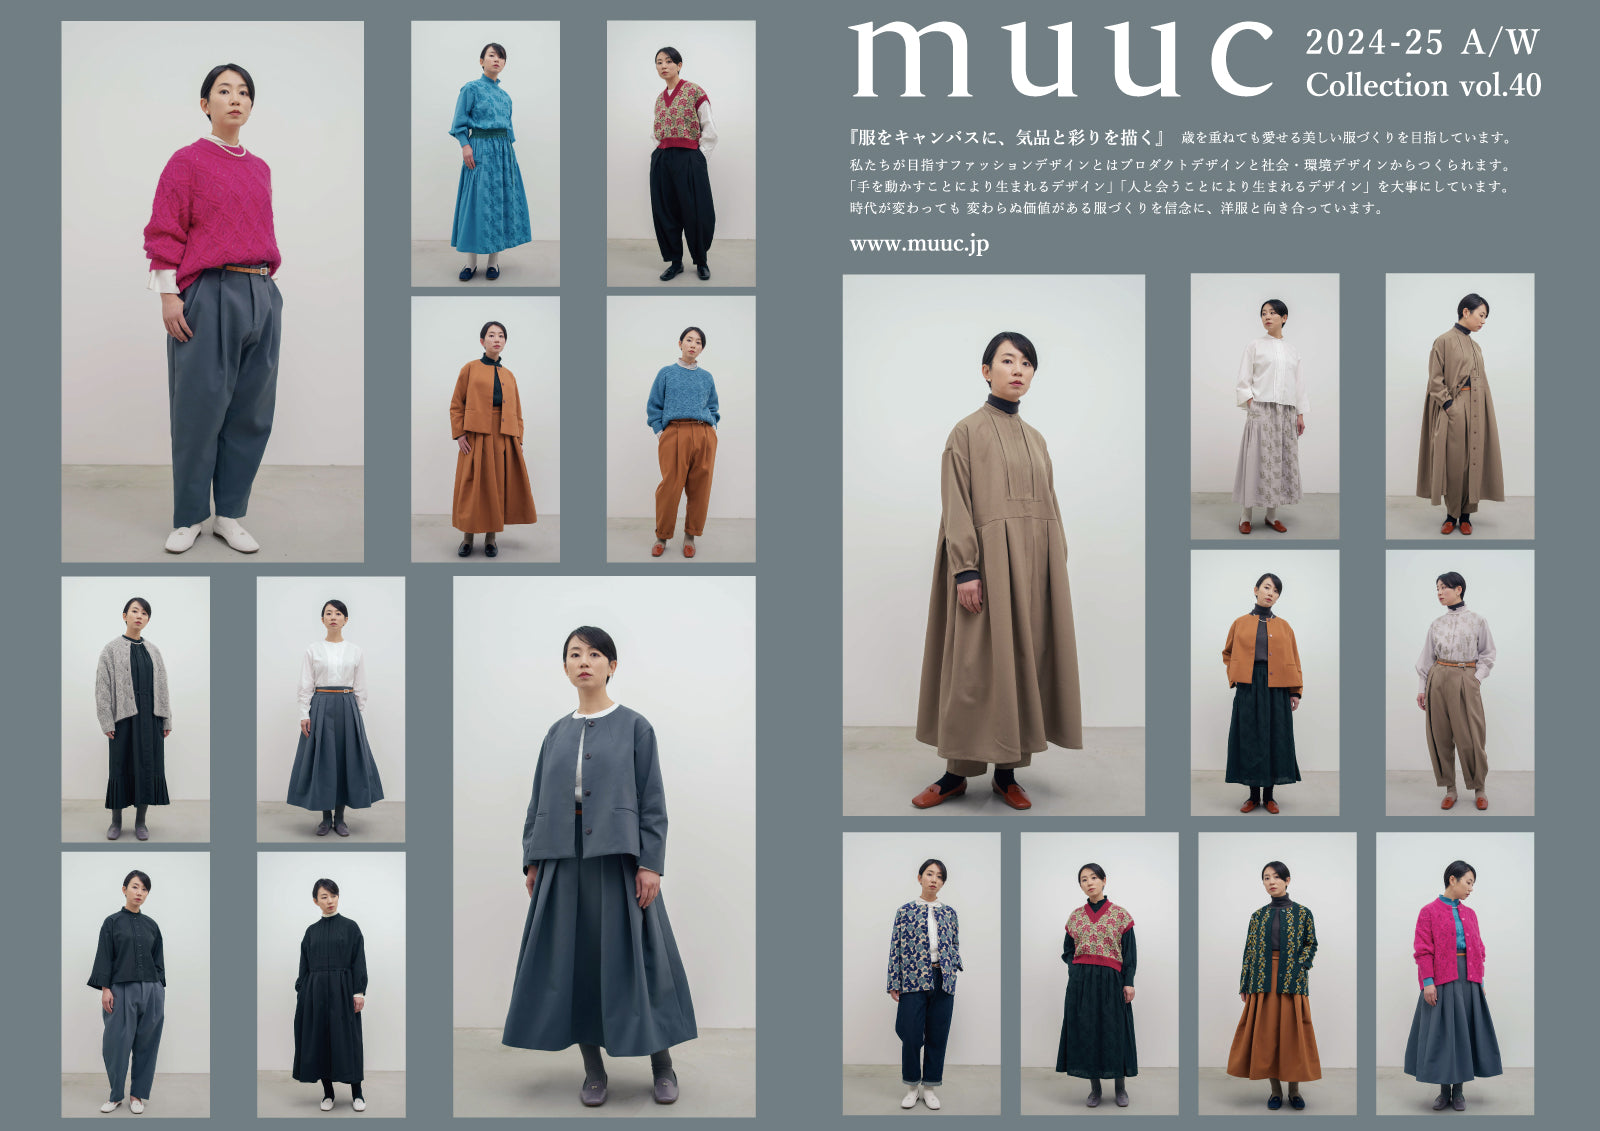 【LOOK BOOK】2024-25 Autumn/Winter collection